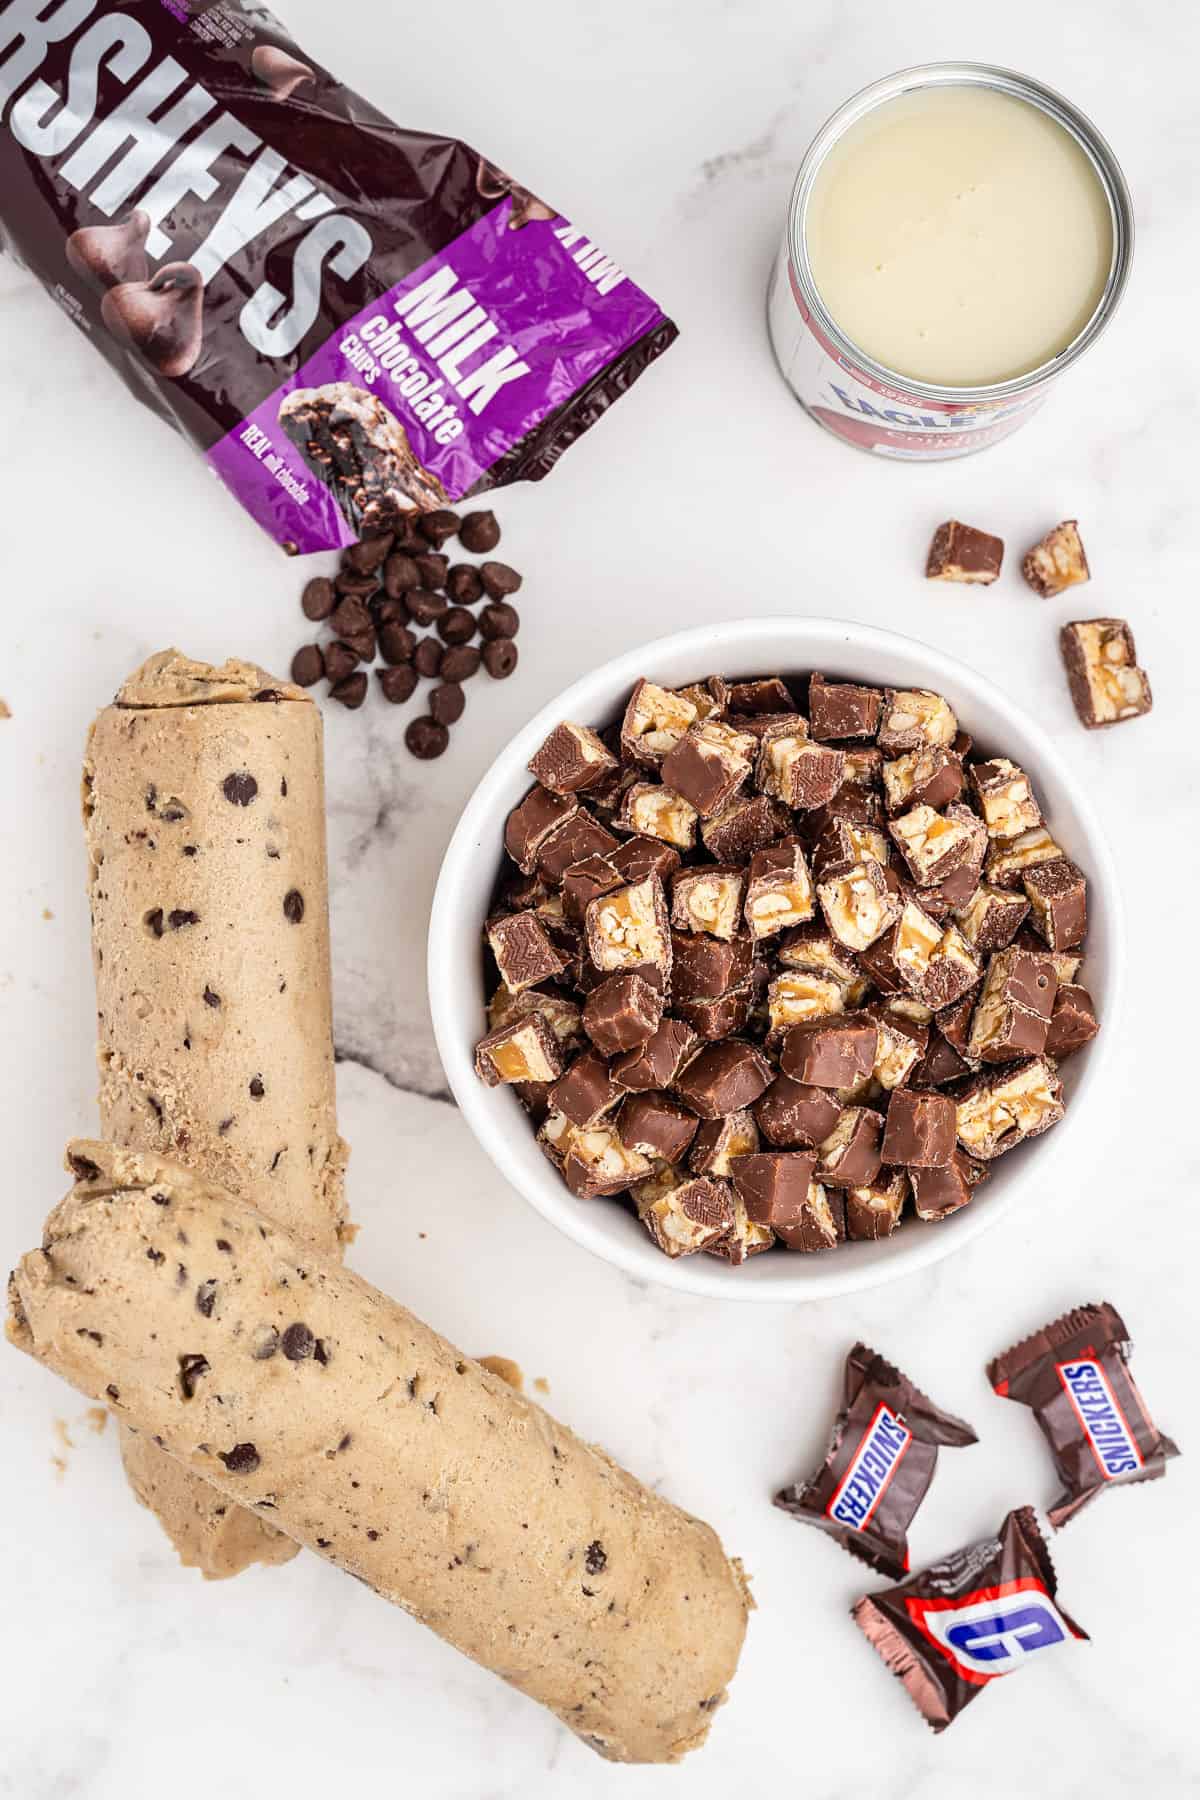 Four ingredients needed for chocolate chip snickers bar recipe.